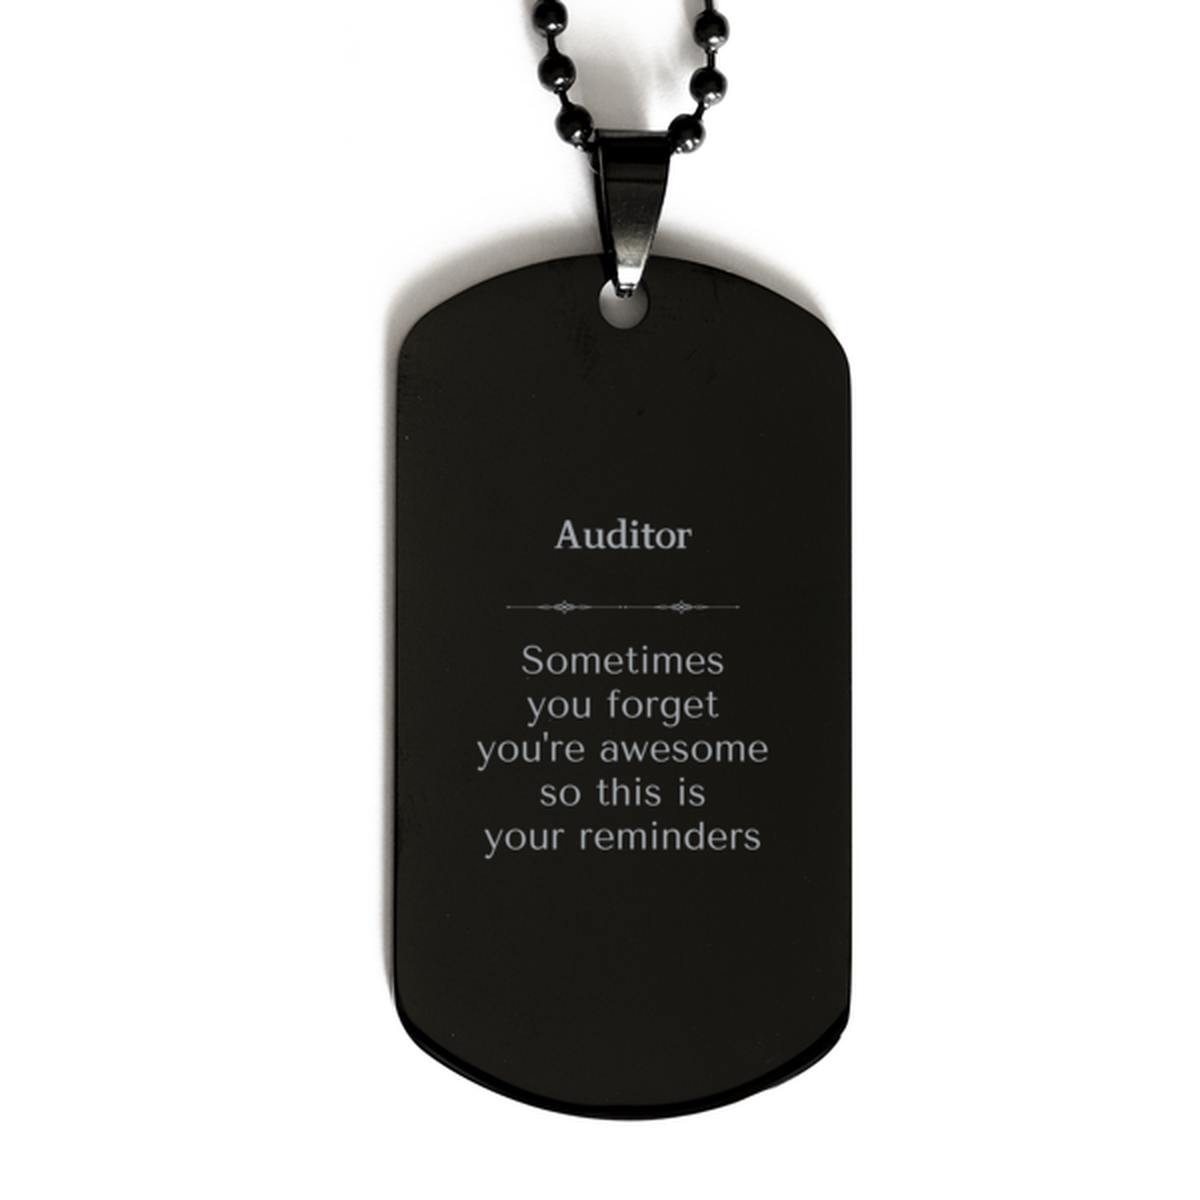 Sentimental Auditor Black Dog Tag, Auditor Sometimes you forget you're awesome so this is your reminders, Graduation Christmas Birthday Gifts for Auditor, Men, Women, Coworkers